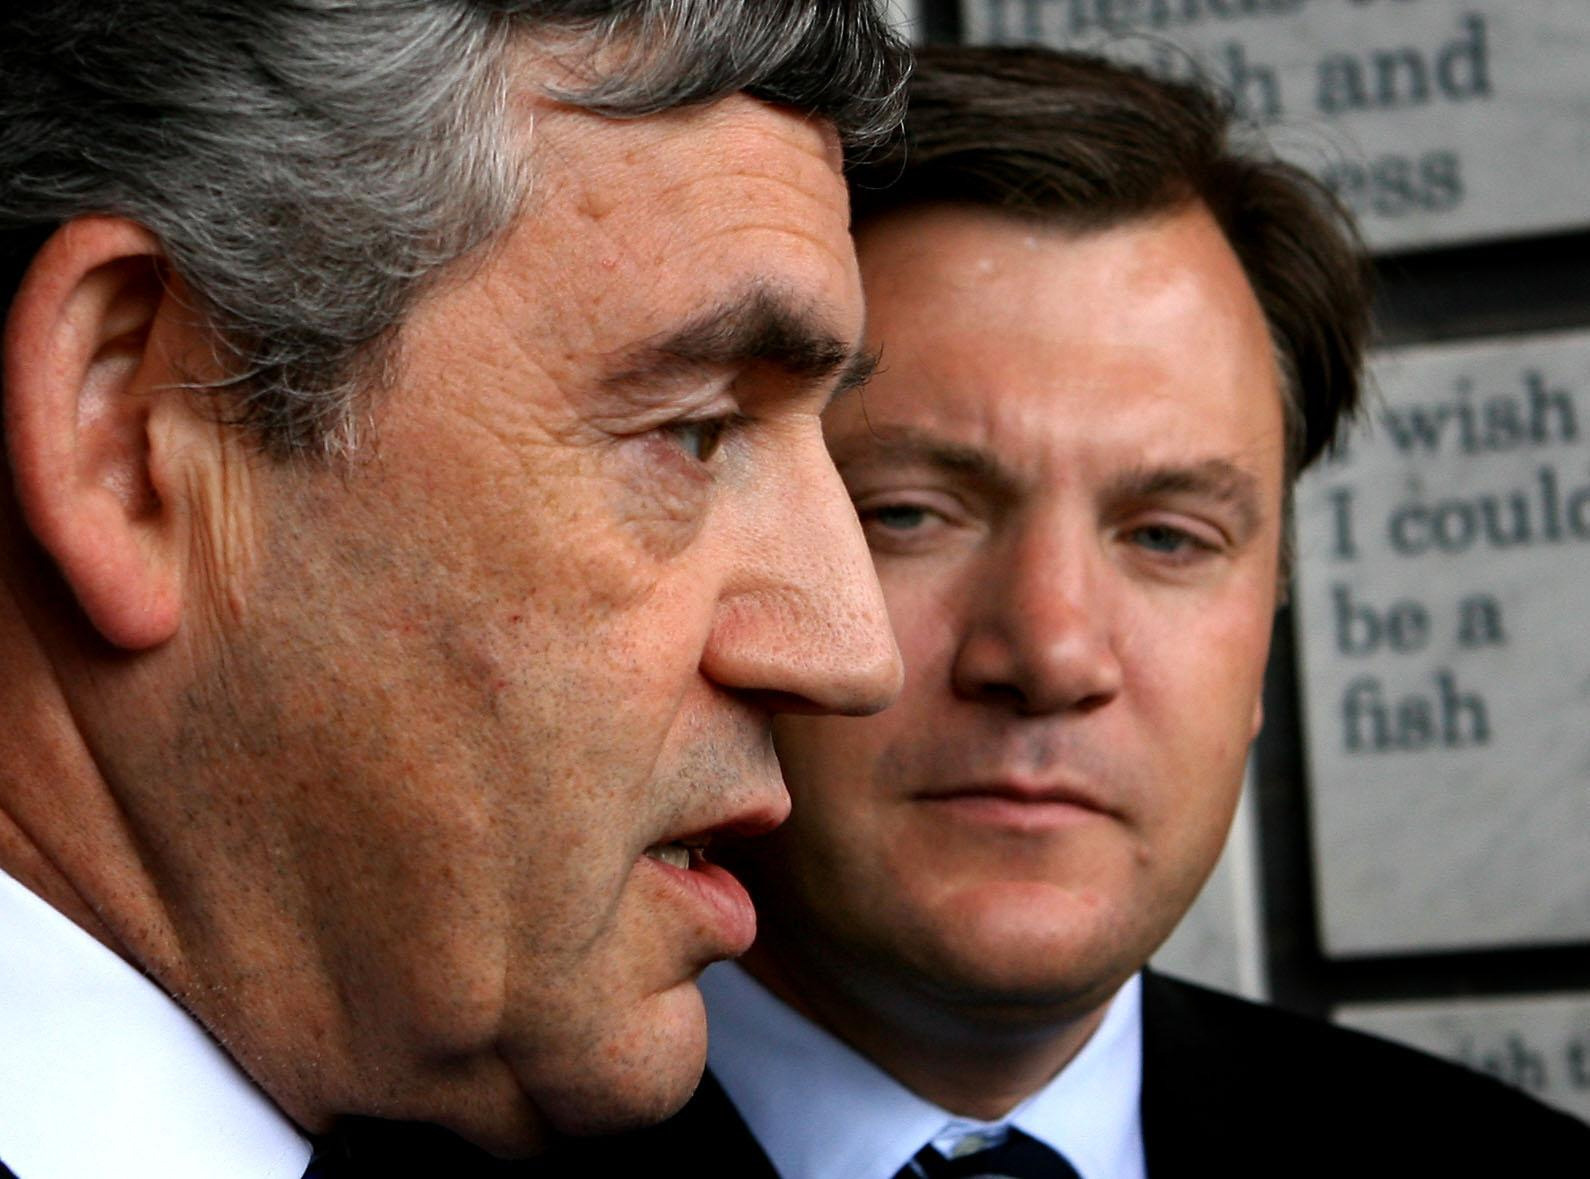 Ed Balls, then Secretary of State for Children, Schools and Families (right) with then Prime Minister Gordon Brown in 2007 (Anthony Devlin/PA) 